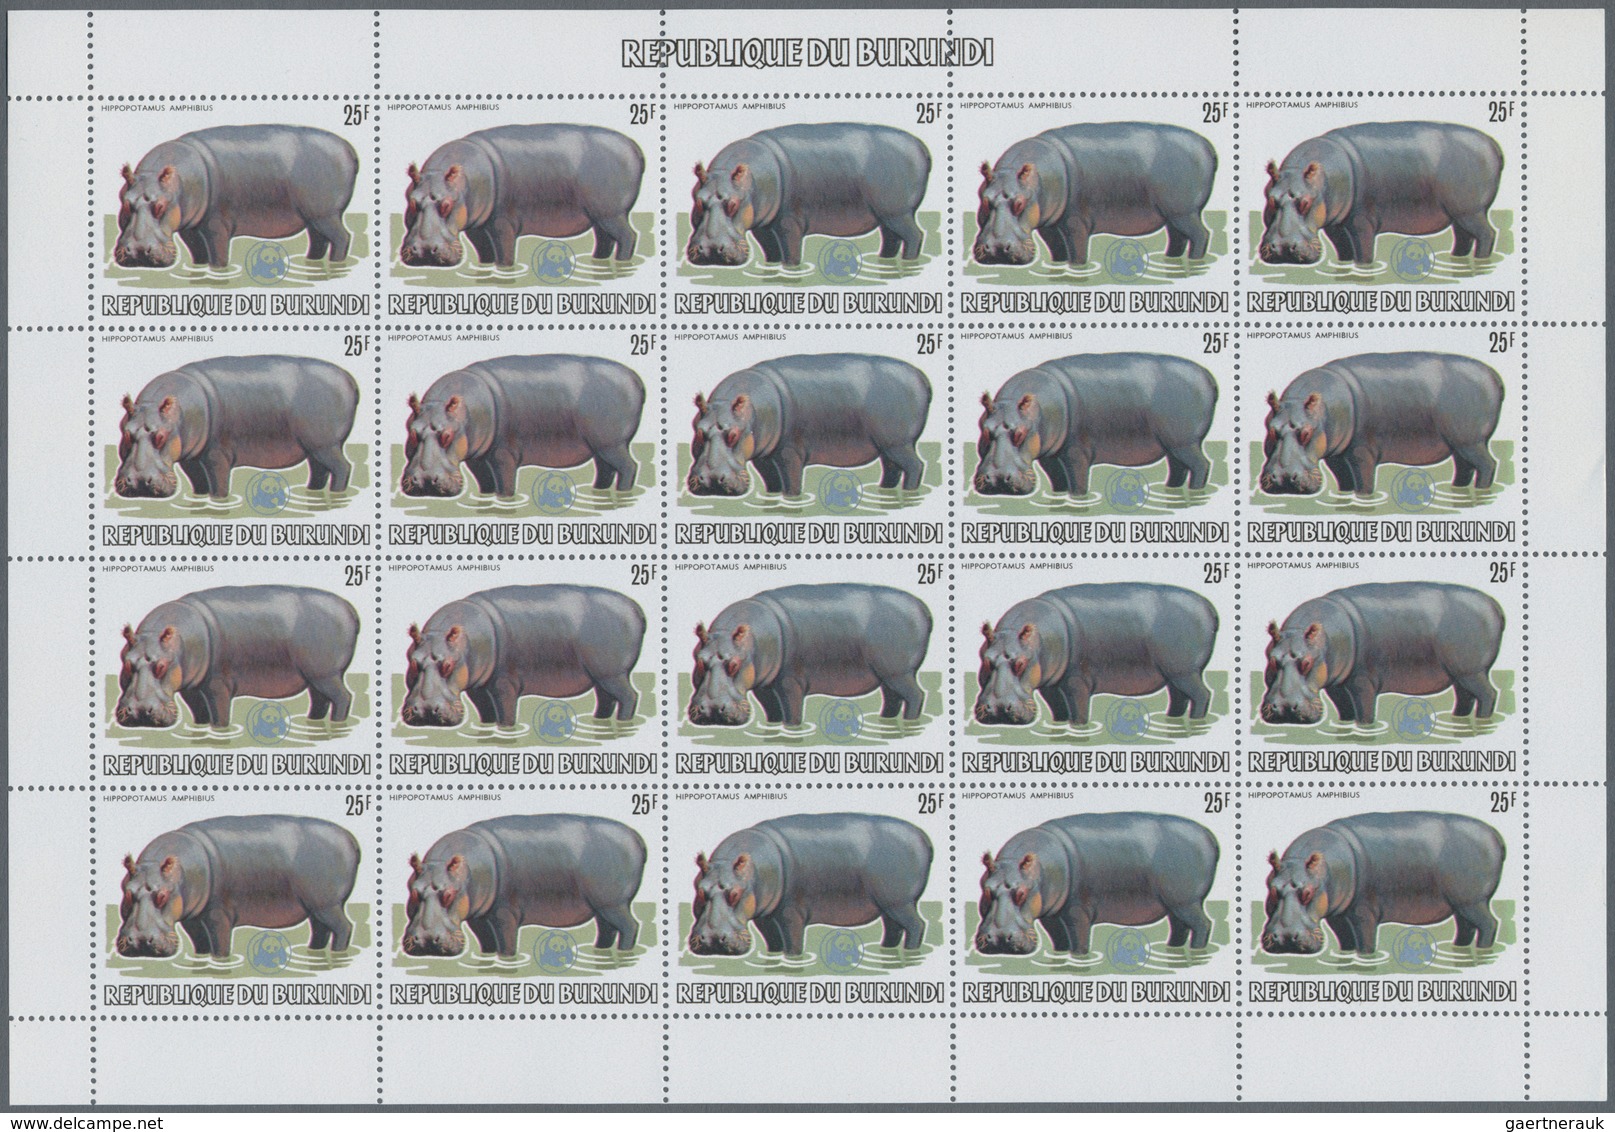 00677 Thematik: WWF: 1983, Burundi. WWF, Annimals. Set of 13 values in complete sheets of 20 with WWF OVER